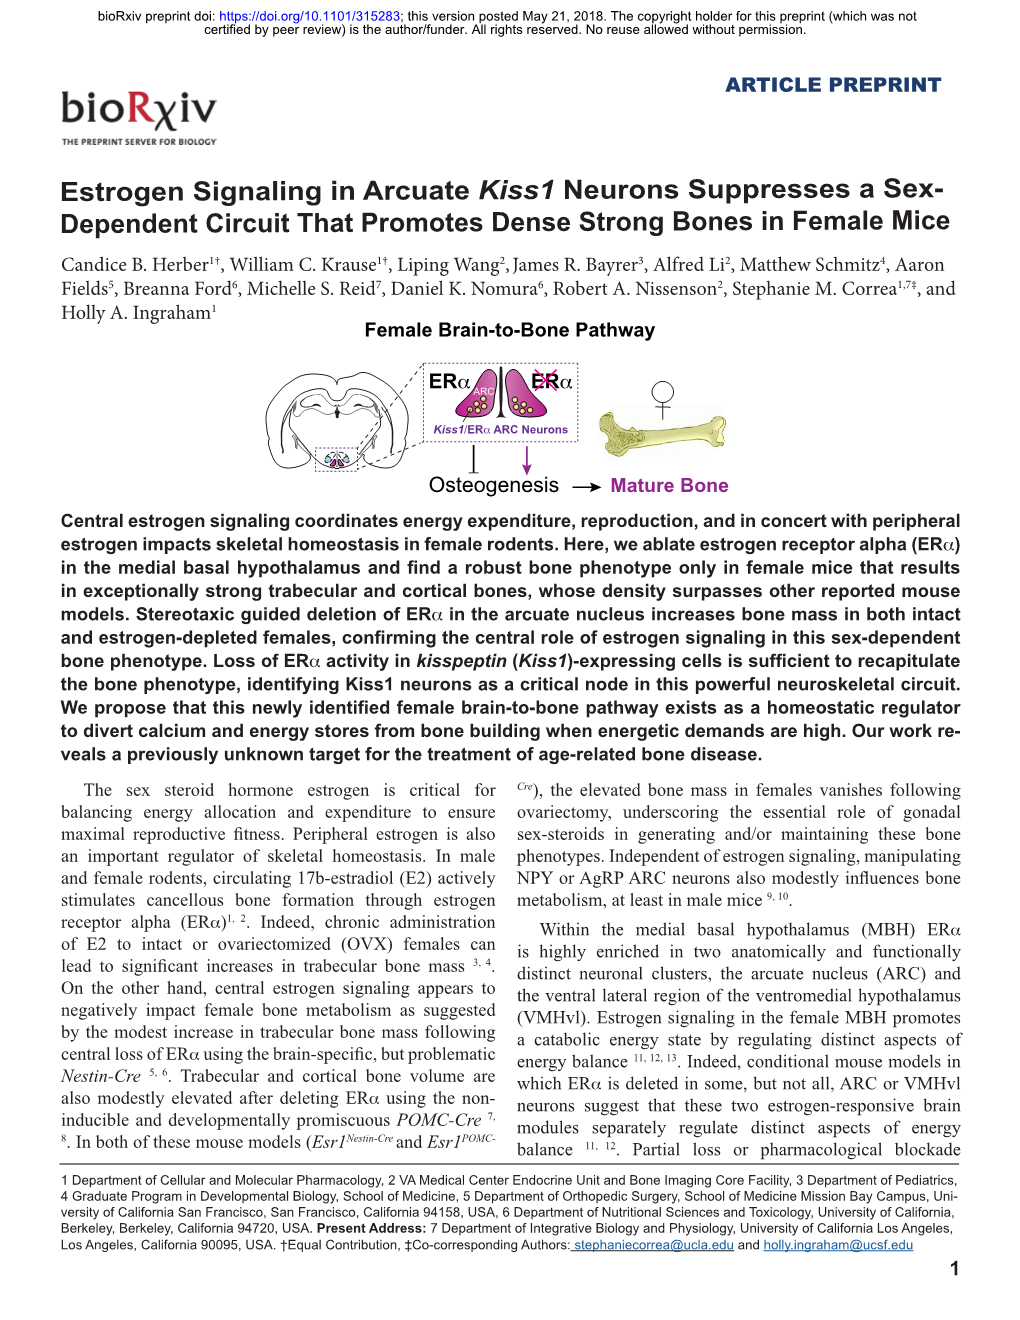 Estrogen Signaling in Arcuate Kiss1 Neurons Suppresses a Sex- Dependent Circuit That Promotes Dense Strong Bones in Female Mice Candice B